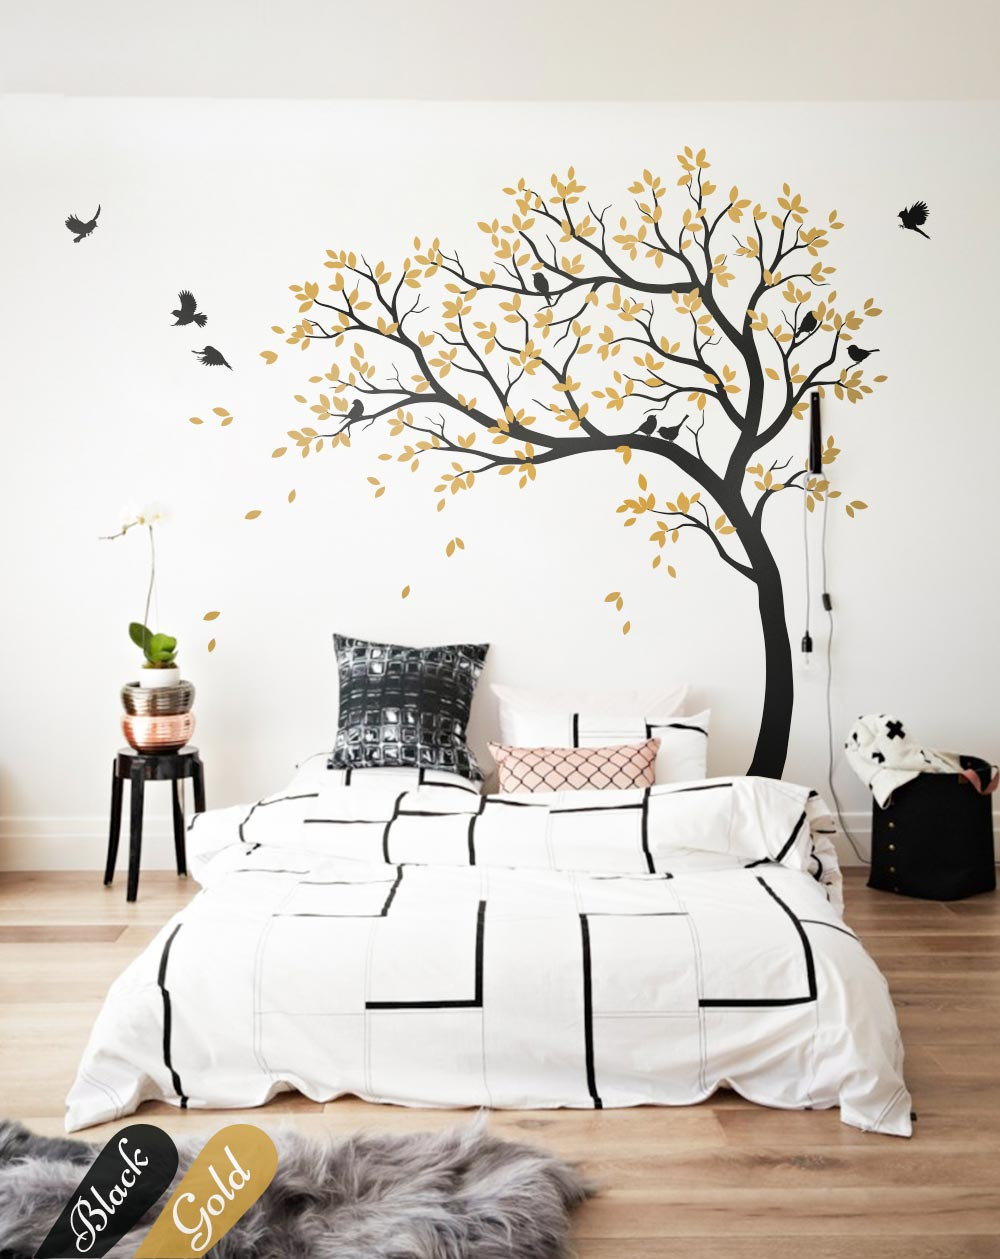 Alicemall Removable Leaves Wall Stickers Bedside TV Background Wall Decals Environmental Protection Living Room Decoration Stickers Kid Room Wall Stickers Large, Leaves 